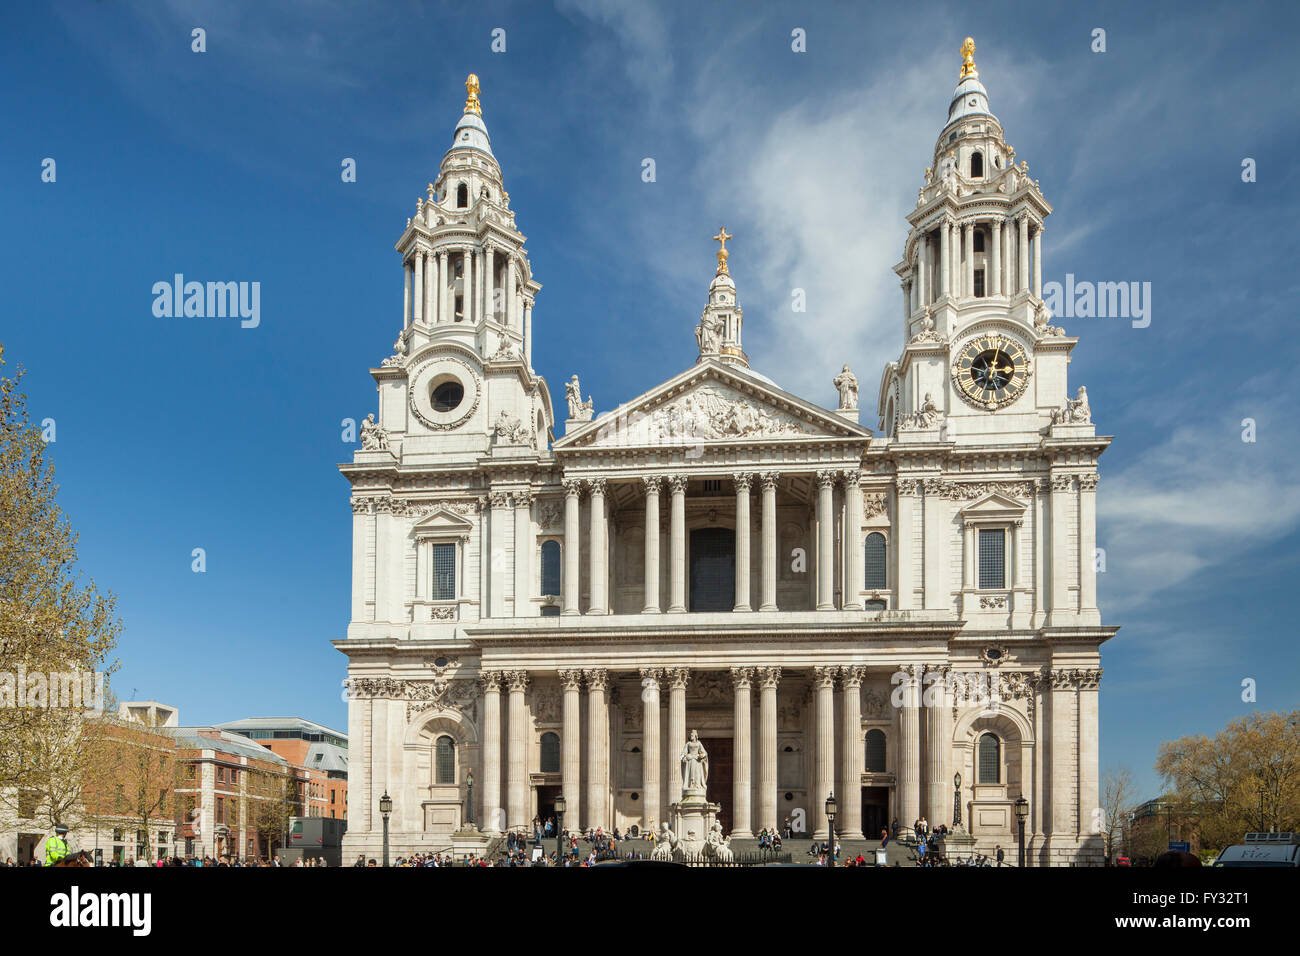 Facade of St Paul's Cathedral in London, England. Stock Photo